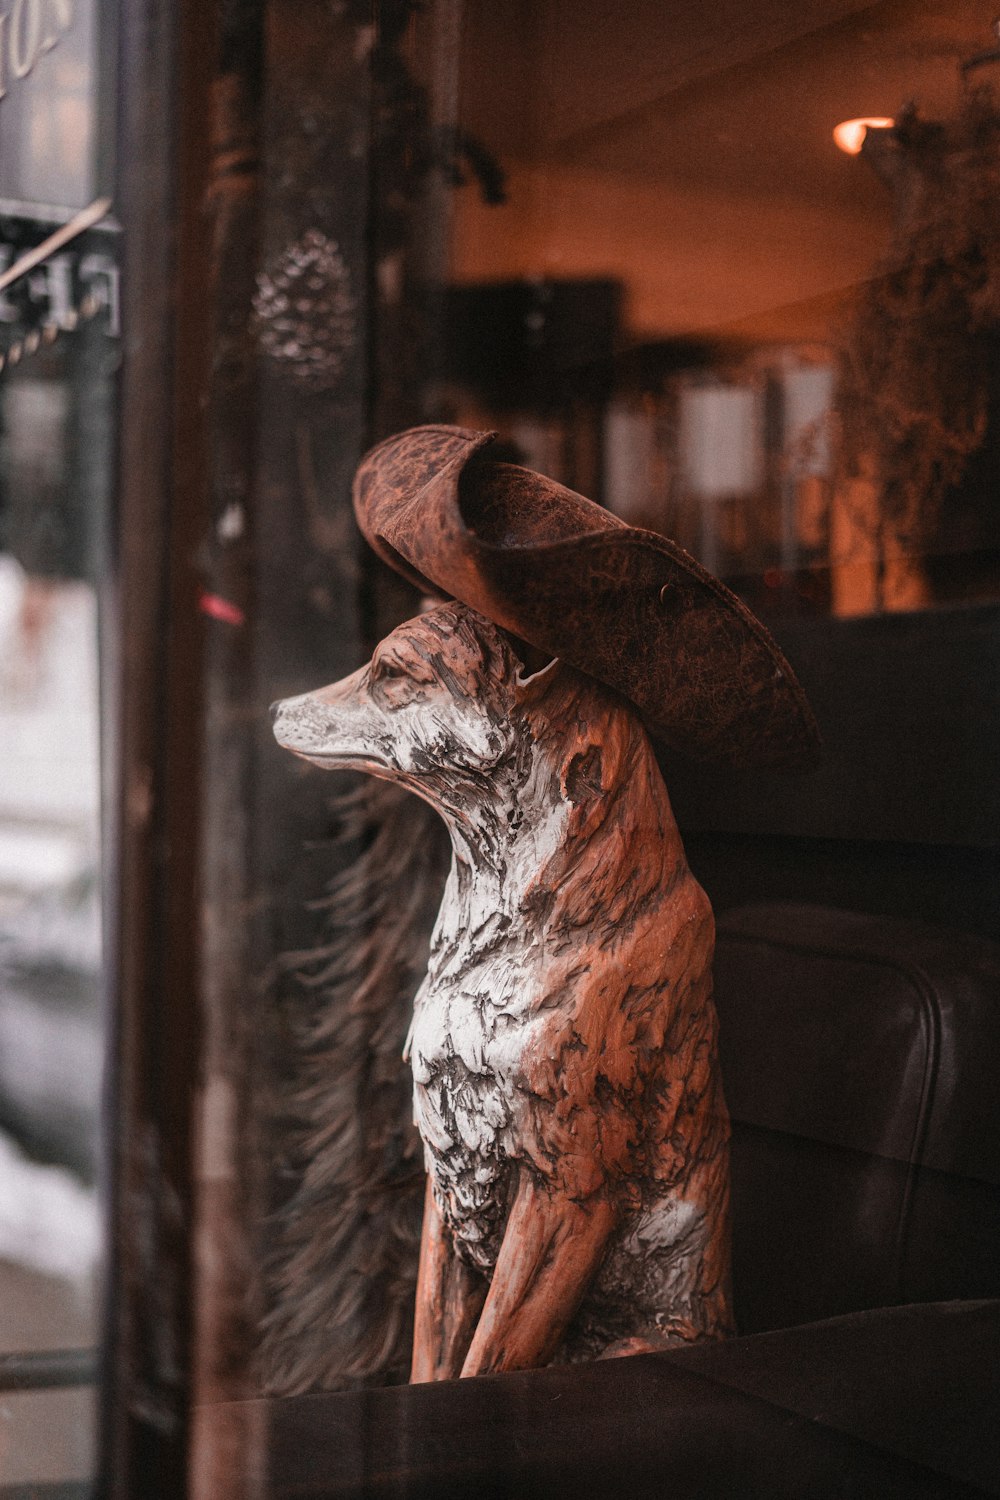 a statue of a dog wearing a hat